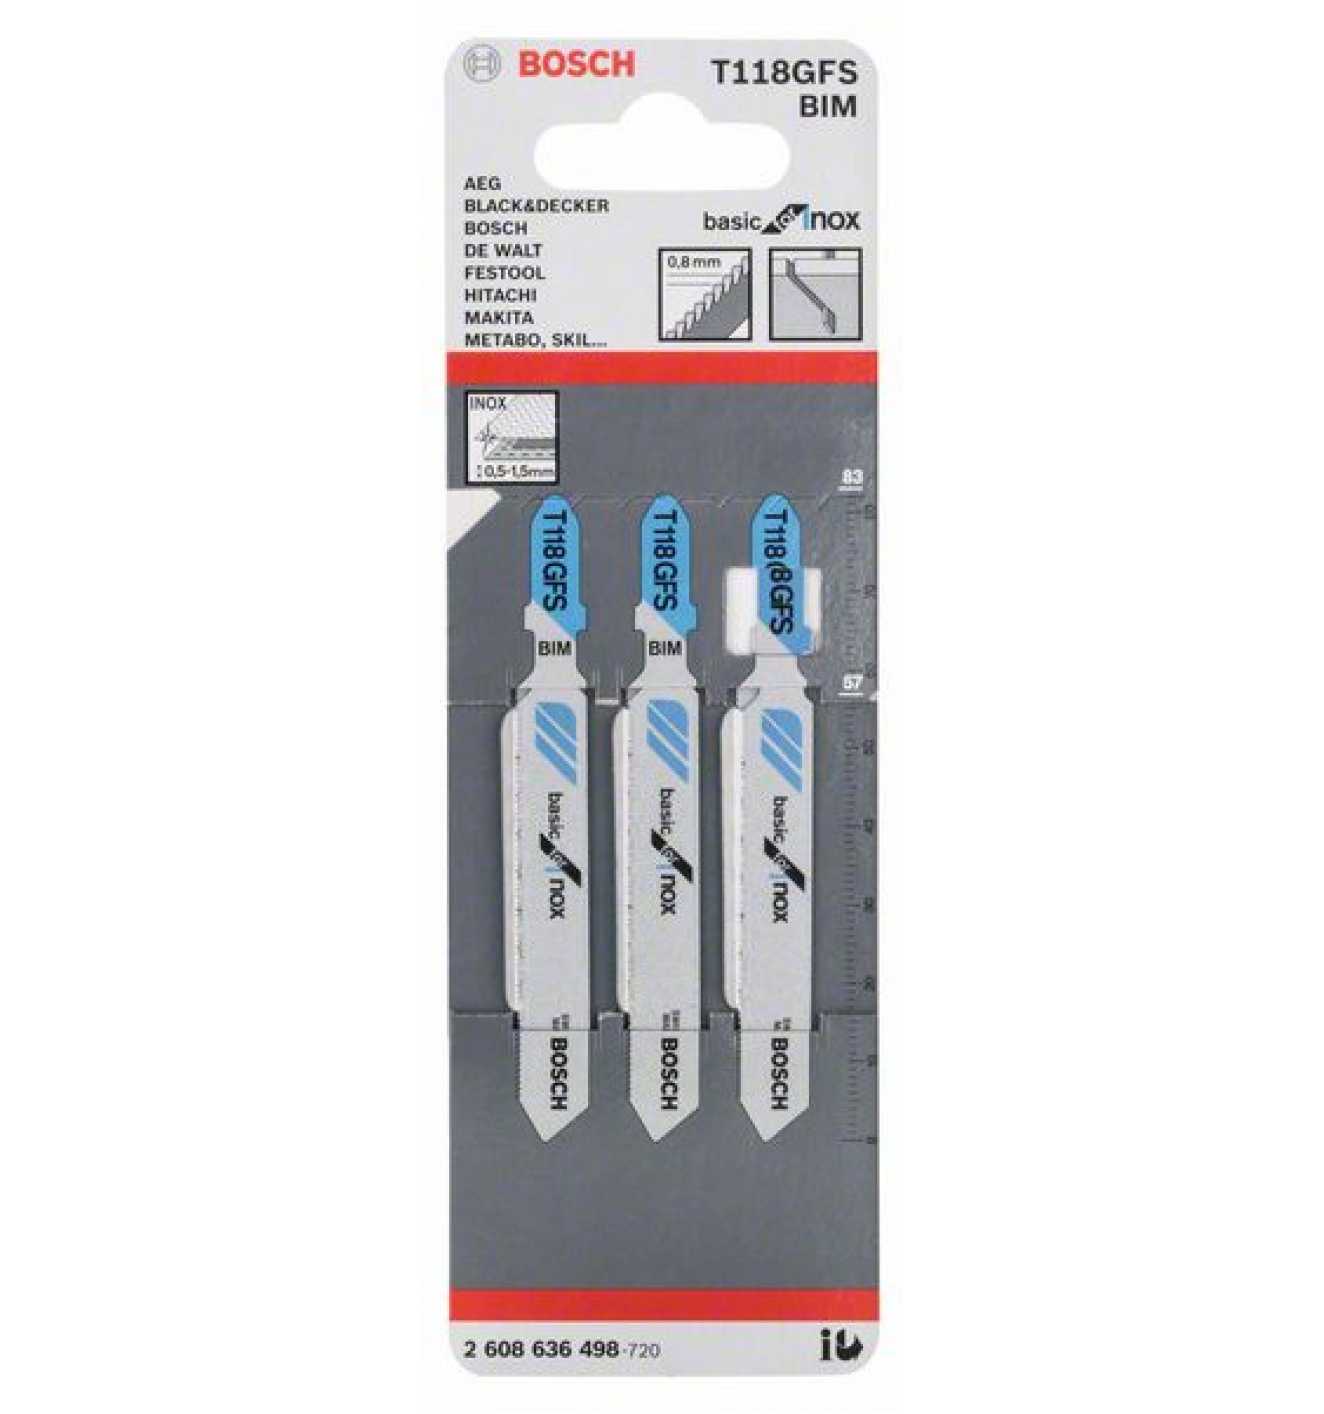 Bosch Jigsaw Blades T 118 GFS Basic for INOX 3 Pack 2608636498 Power Tool Services